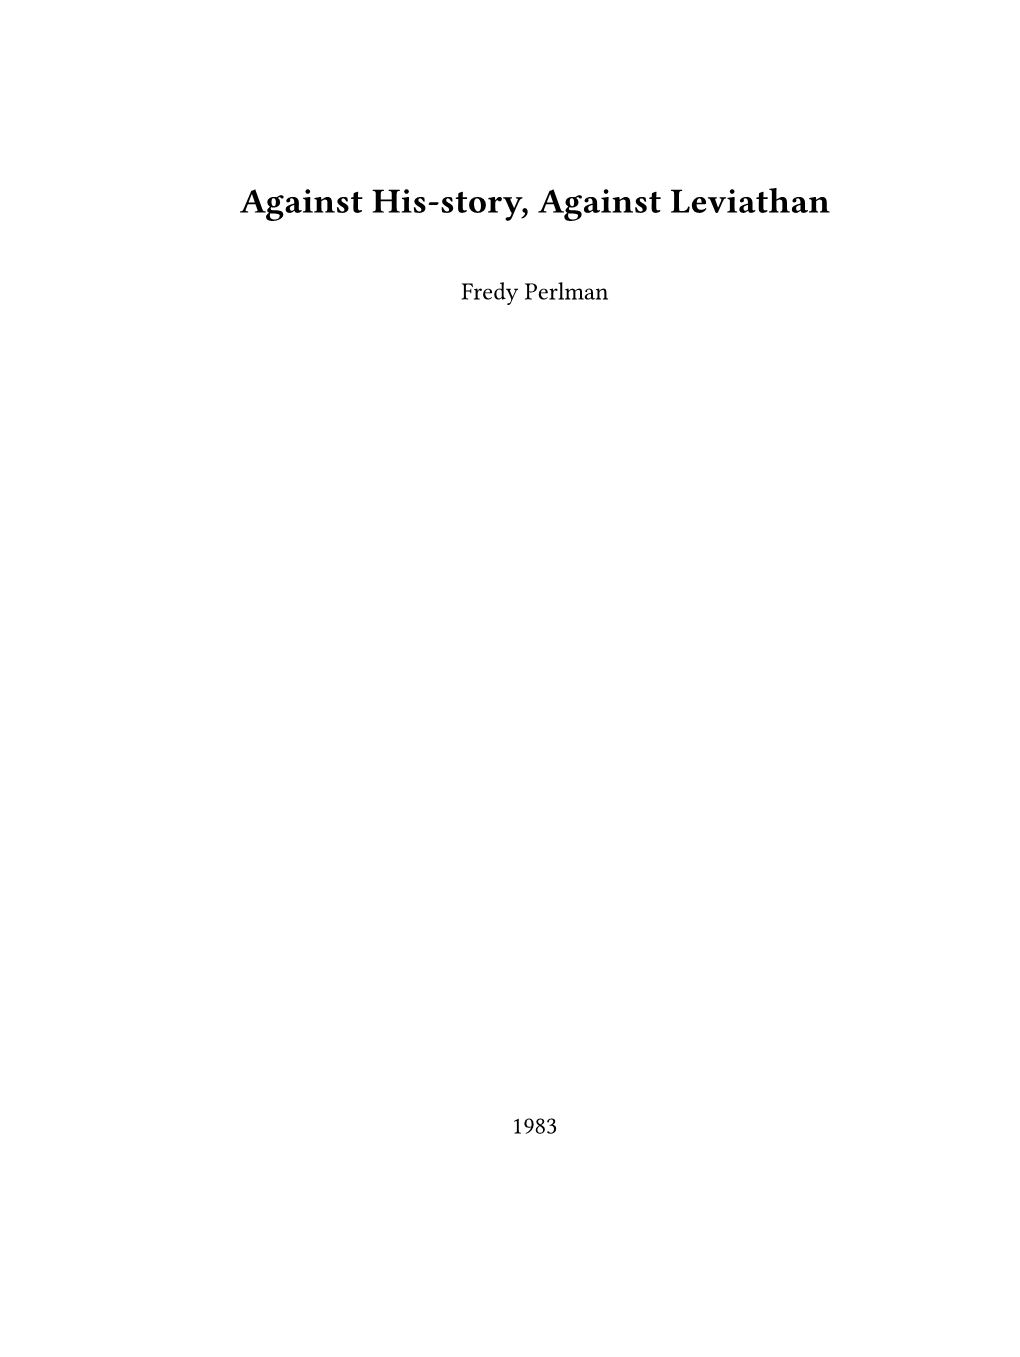 Against His-Story, Against Leviathan